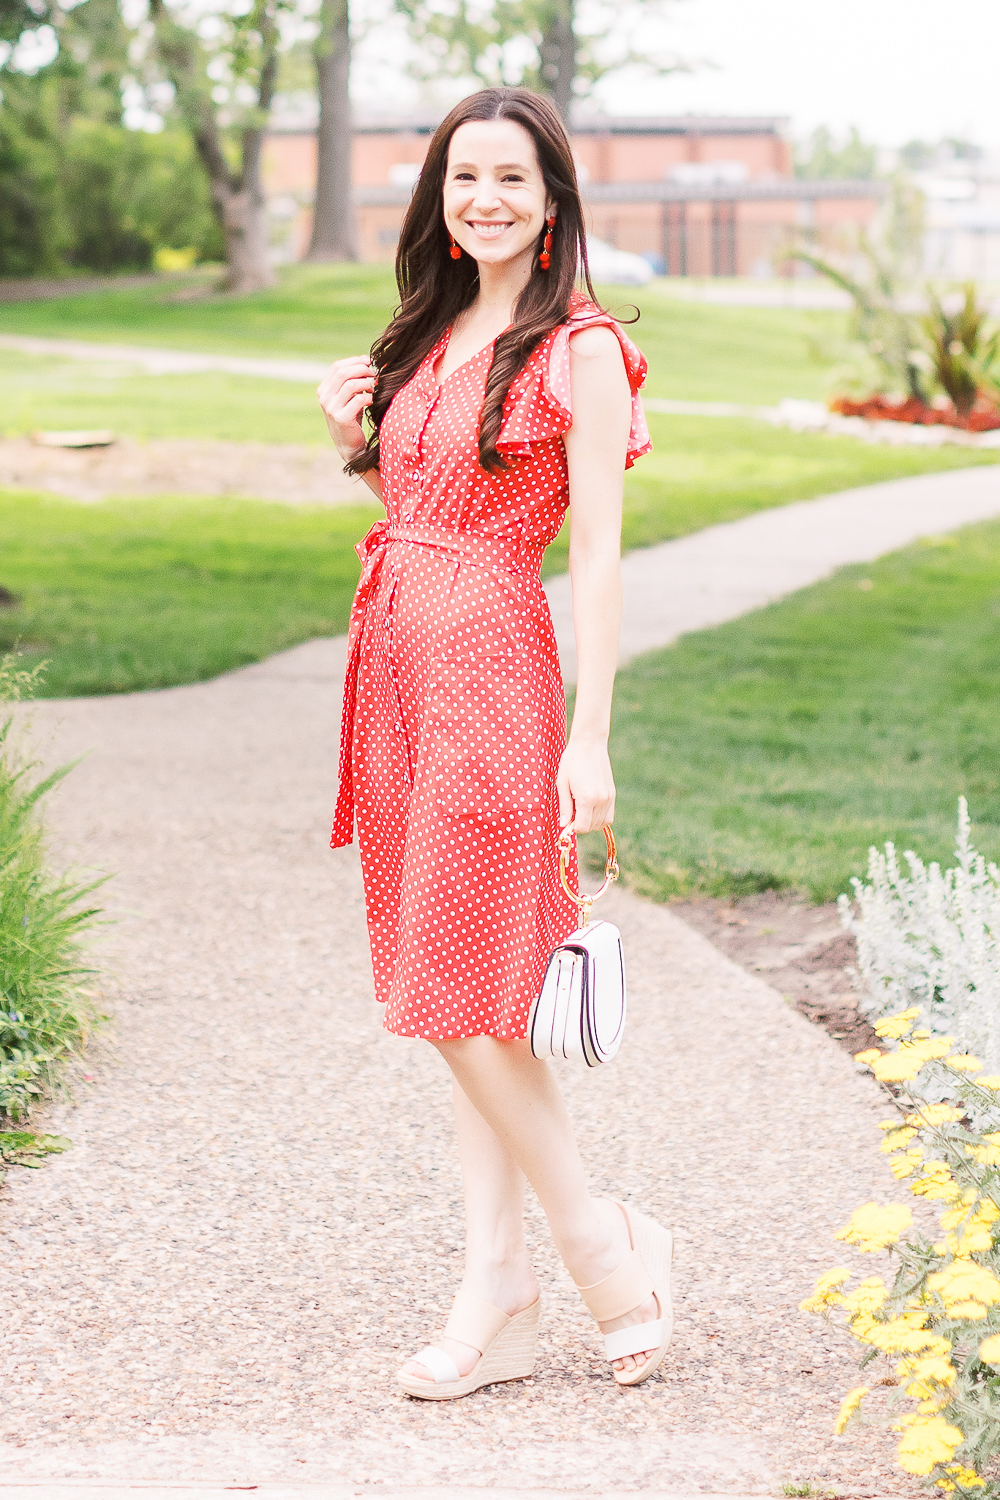 Red polka dot midi dress outfit, 10 Preppy 4th of July Outfit Ideas for Women by popular affordable fashion blogger Stephanie Ziajka from Diary of a Debutante